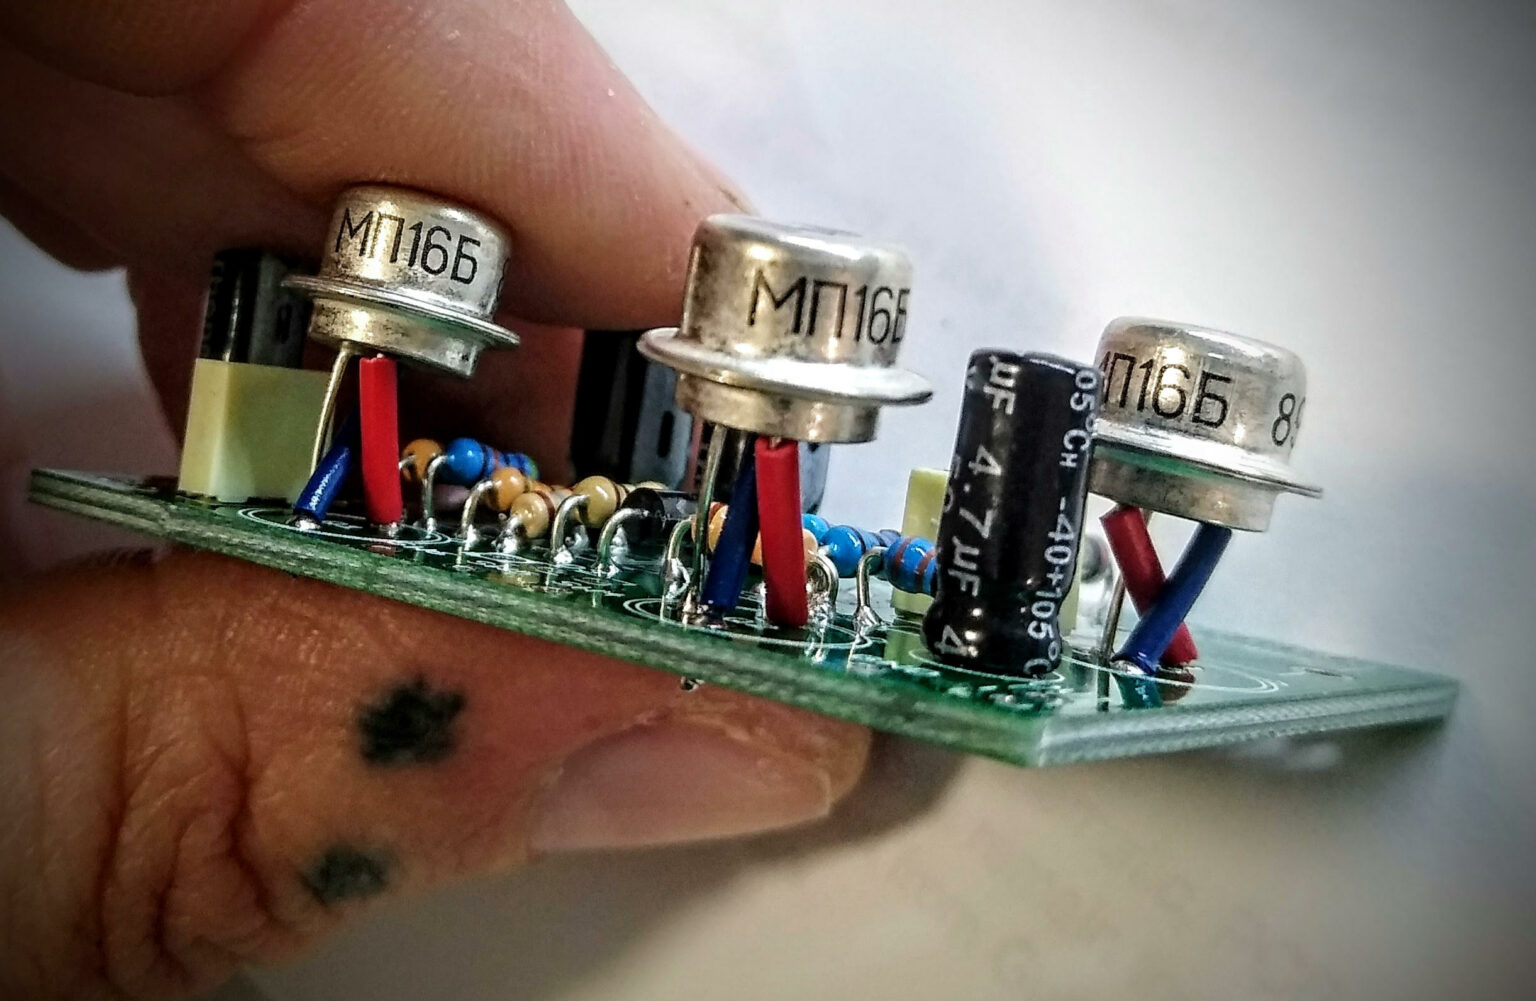 Between the thumb and forefinger of Jason Sunderland is a small array of transistors and capacitors that will pump a special sound into his bass guitar.